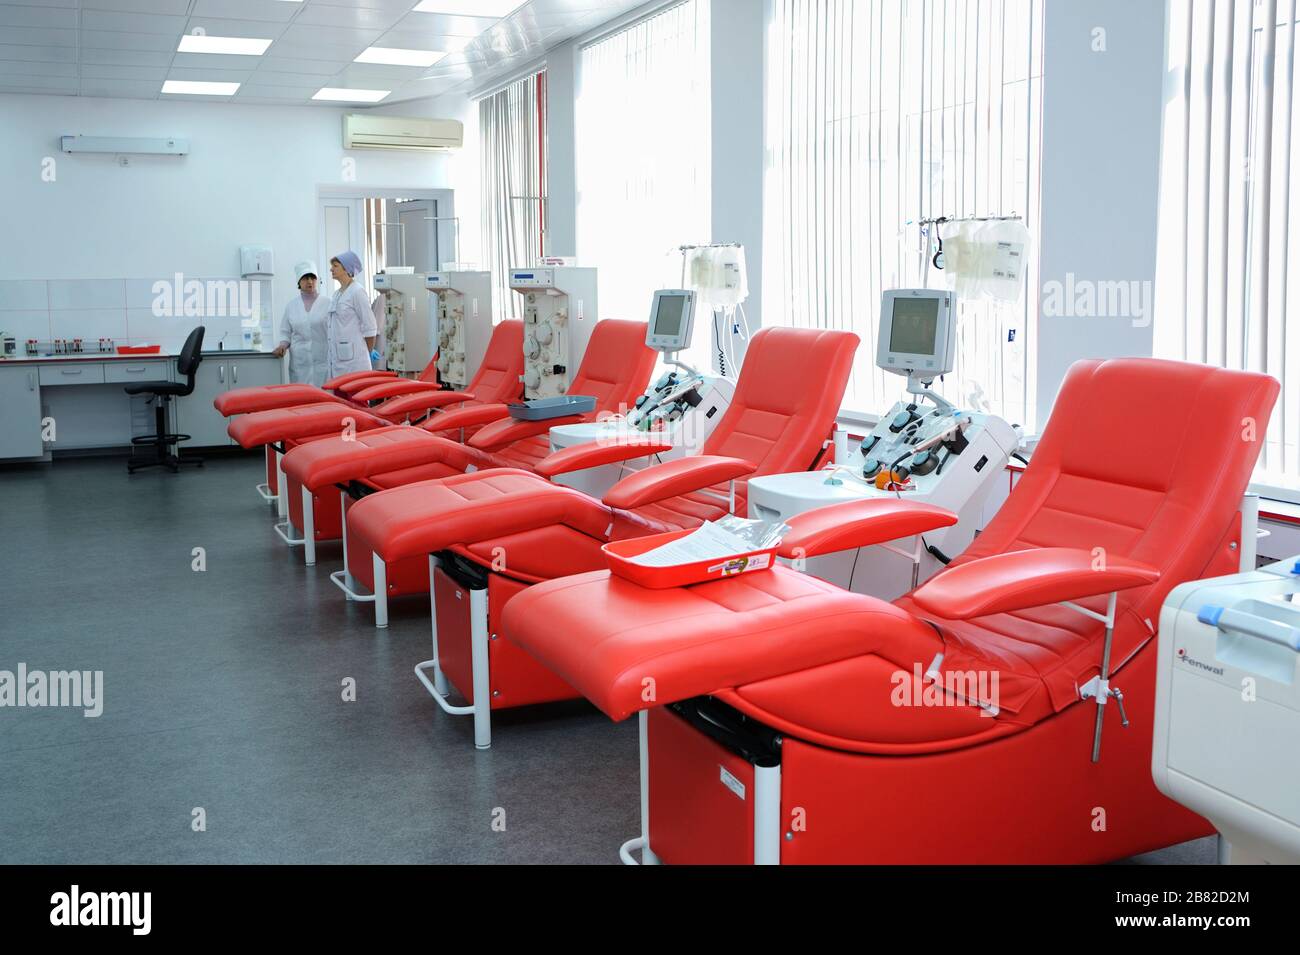 Separating apparatus and daybeds set at the City (municipal) blood transfusion station for taking blood from donors Stock Photo